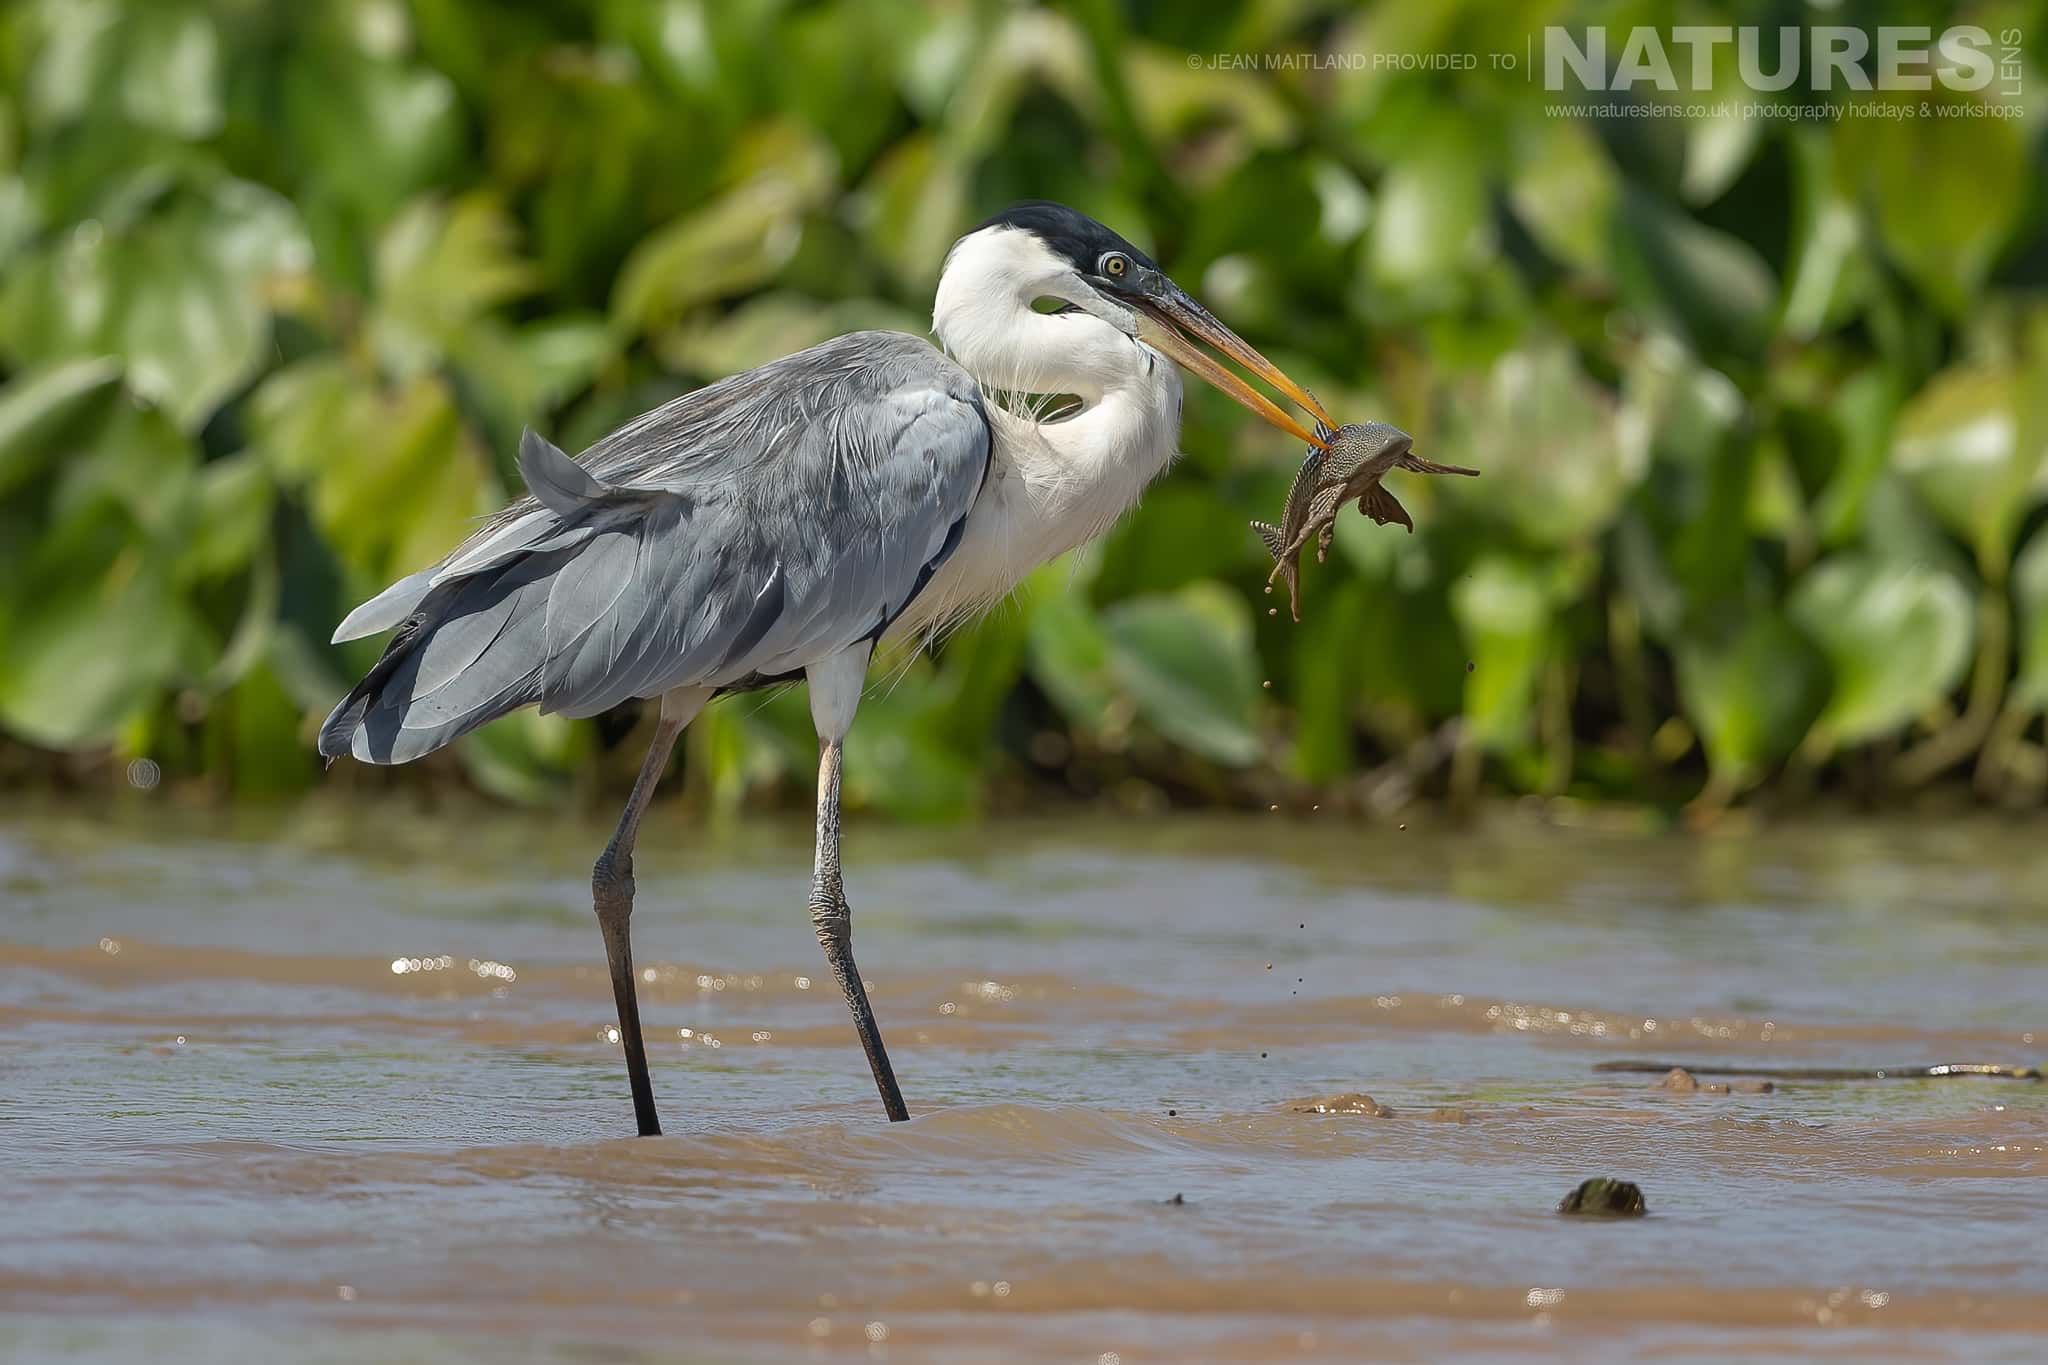 A Cocoi Heron With A Freshly Caught Fish In The Waters Of The Pantanal River During The Natureslens Jaguars Of The Pantanal Photography Holiday